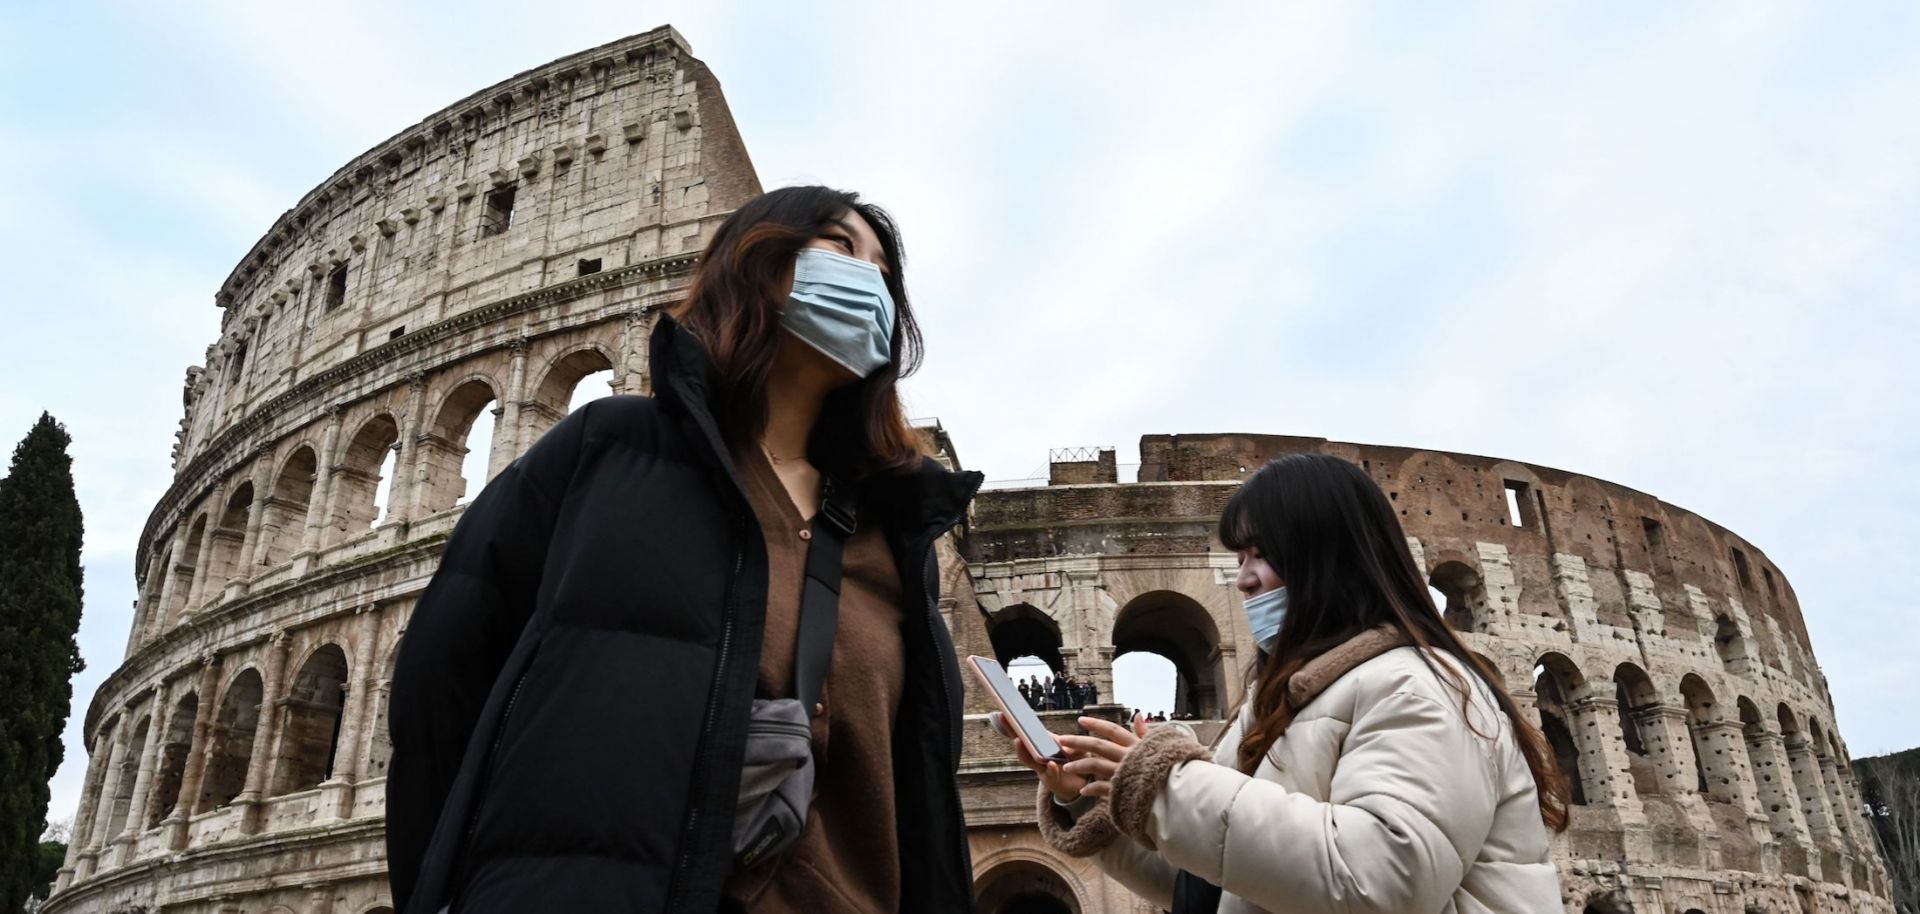 Two women wearing blue, protective respiratory masks take a tour outside the Colosseum in Rome, Italy, on Jan. 31, 2020, after two cases of the new coronavirus were confirmed in the city. 